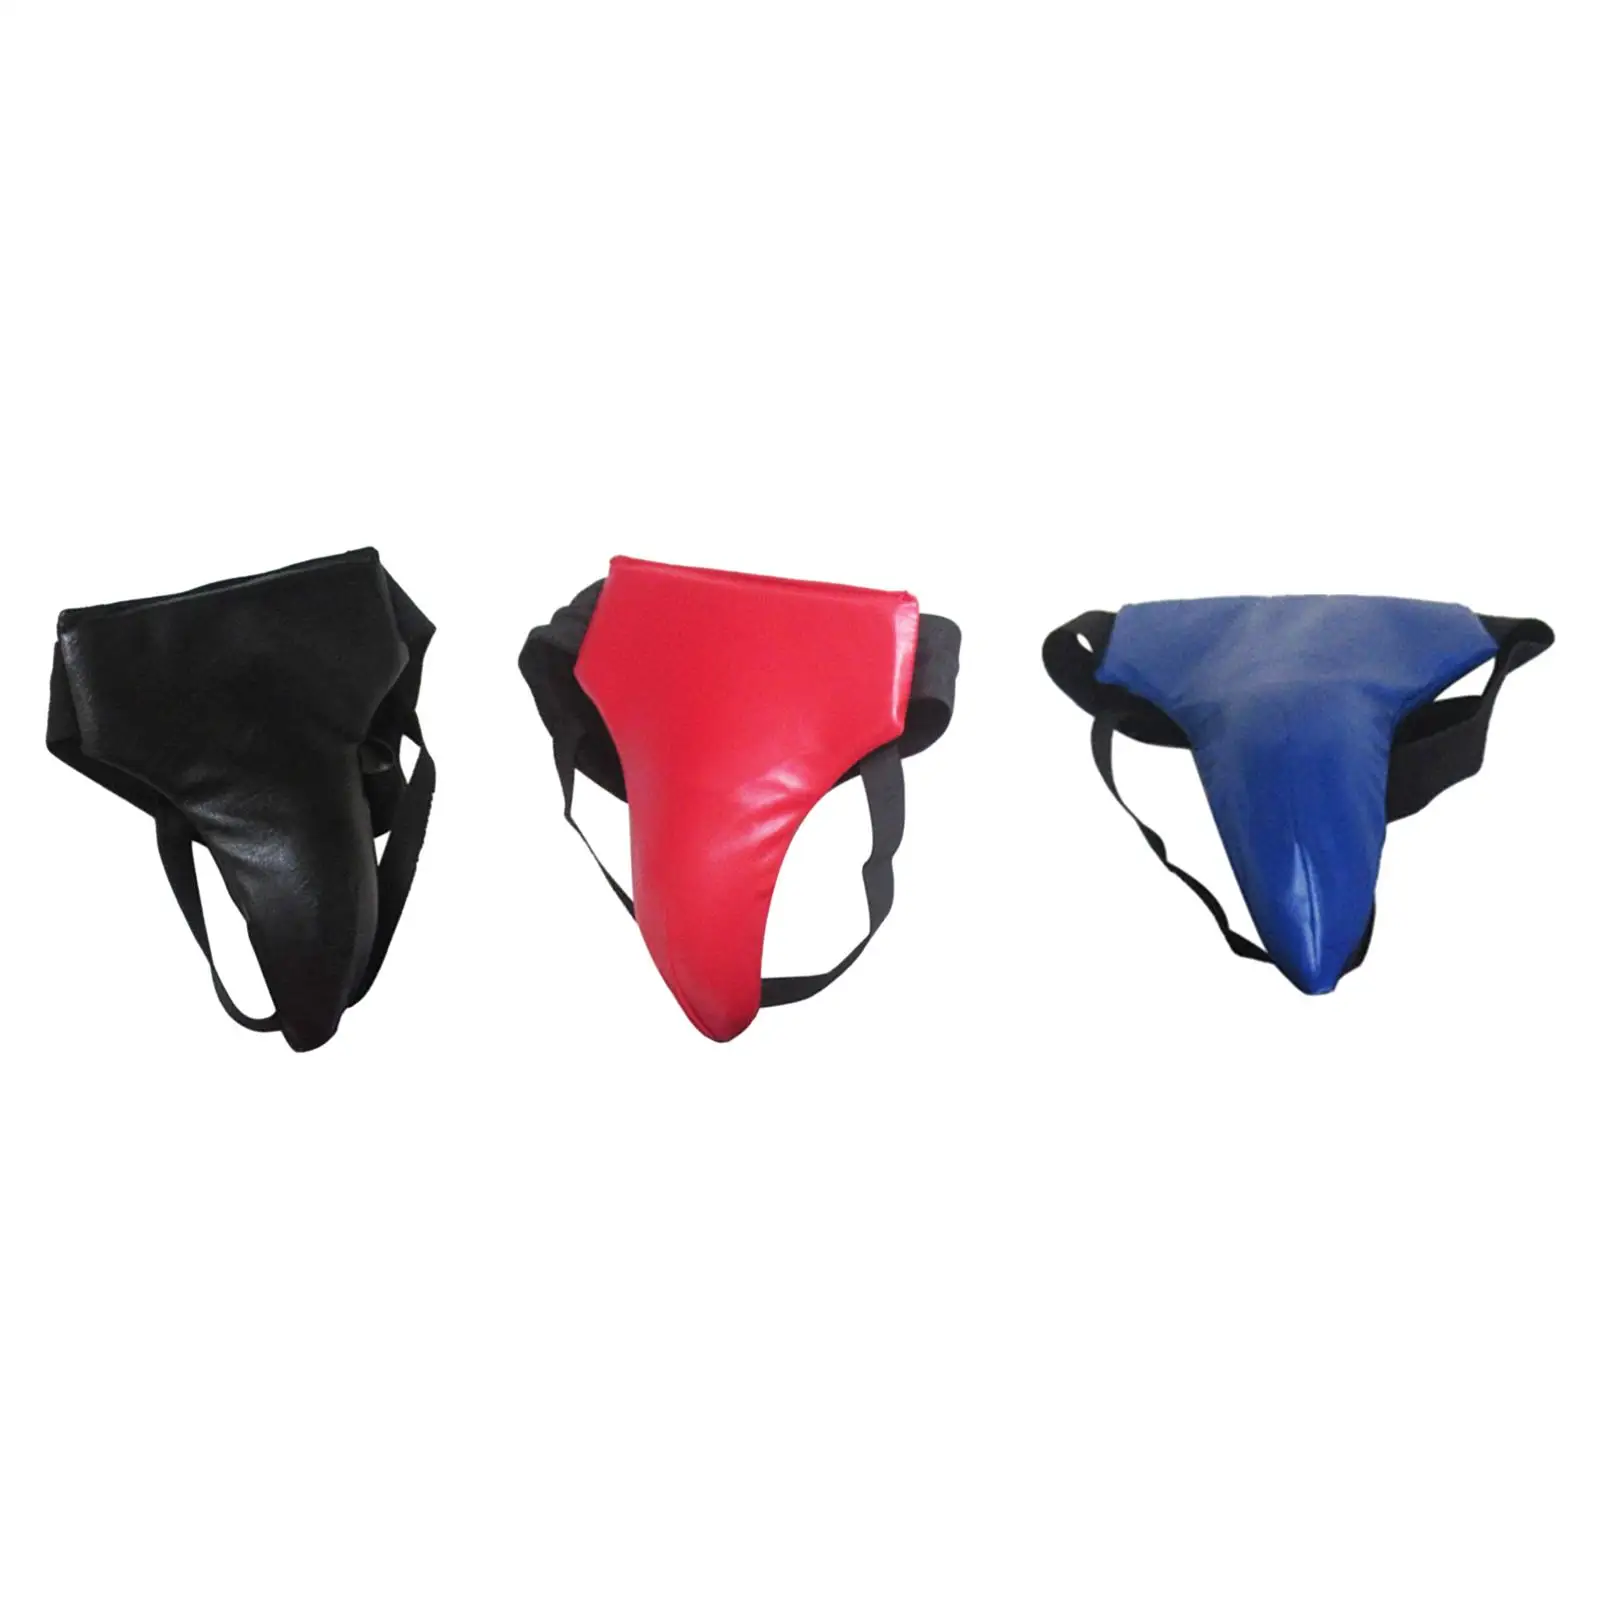 Boxing Groin Guard Training Portable Exercise Underwear Crotch Protector for Martial Arts Kickboxing Sanda Mma Training Kung Fu